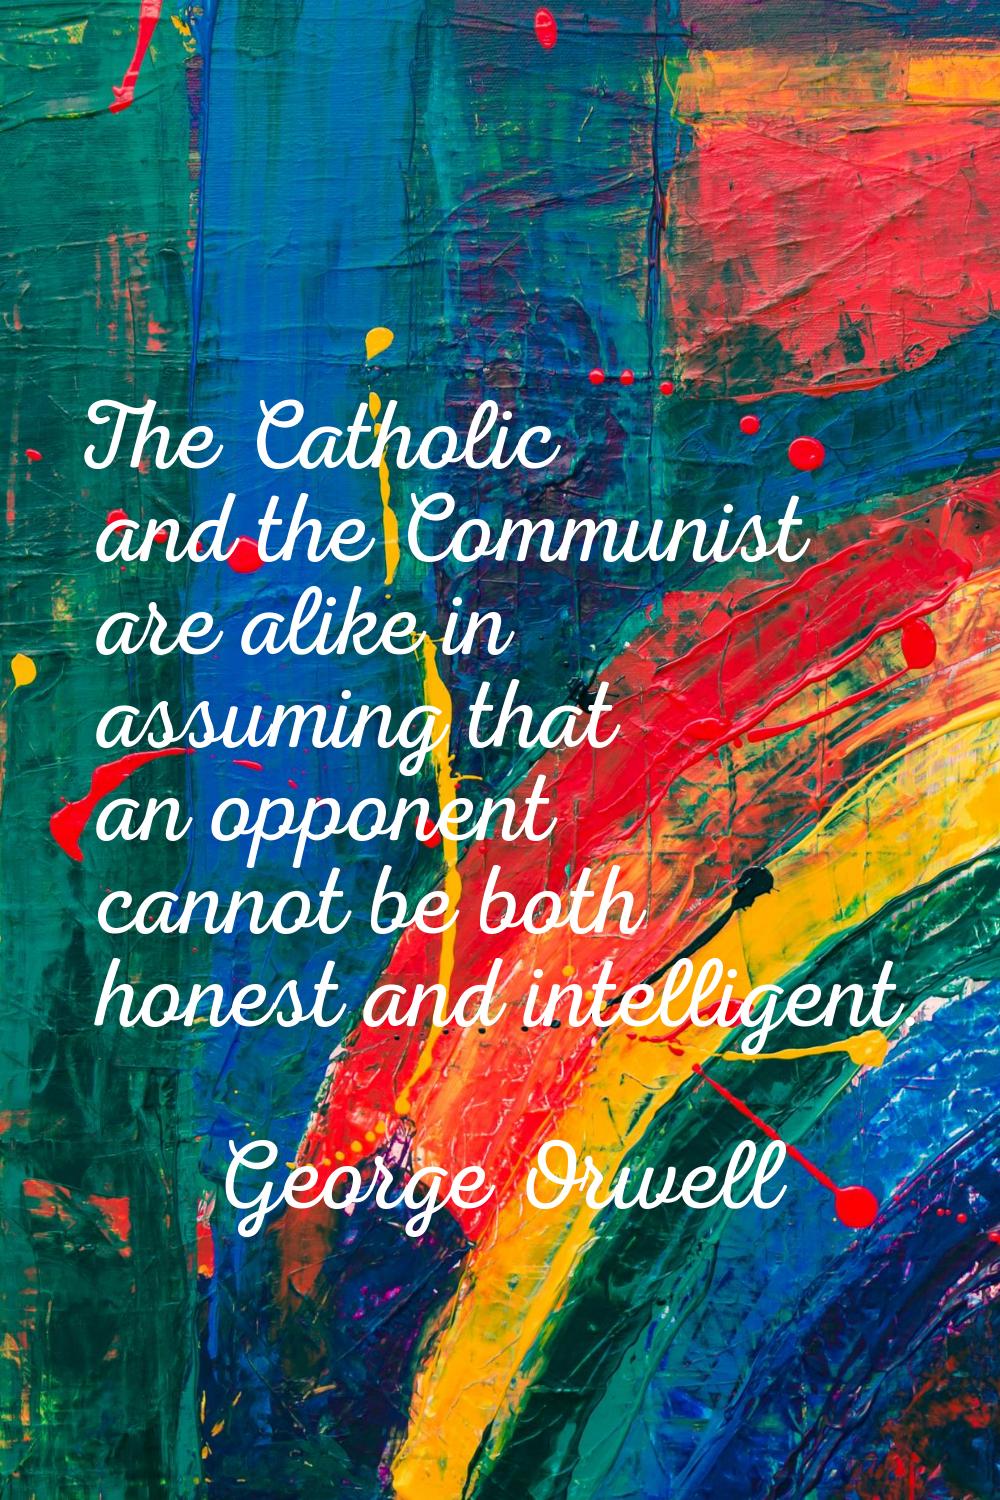 The Catholic and the Communist are alike in assuming that an opponent cannot be both honest and int